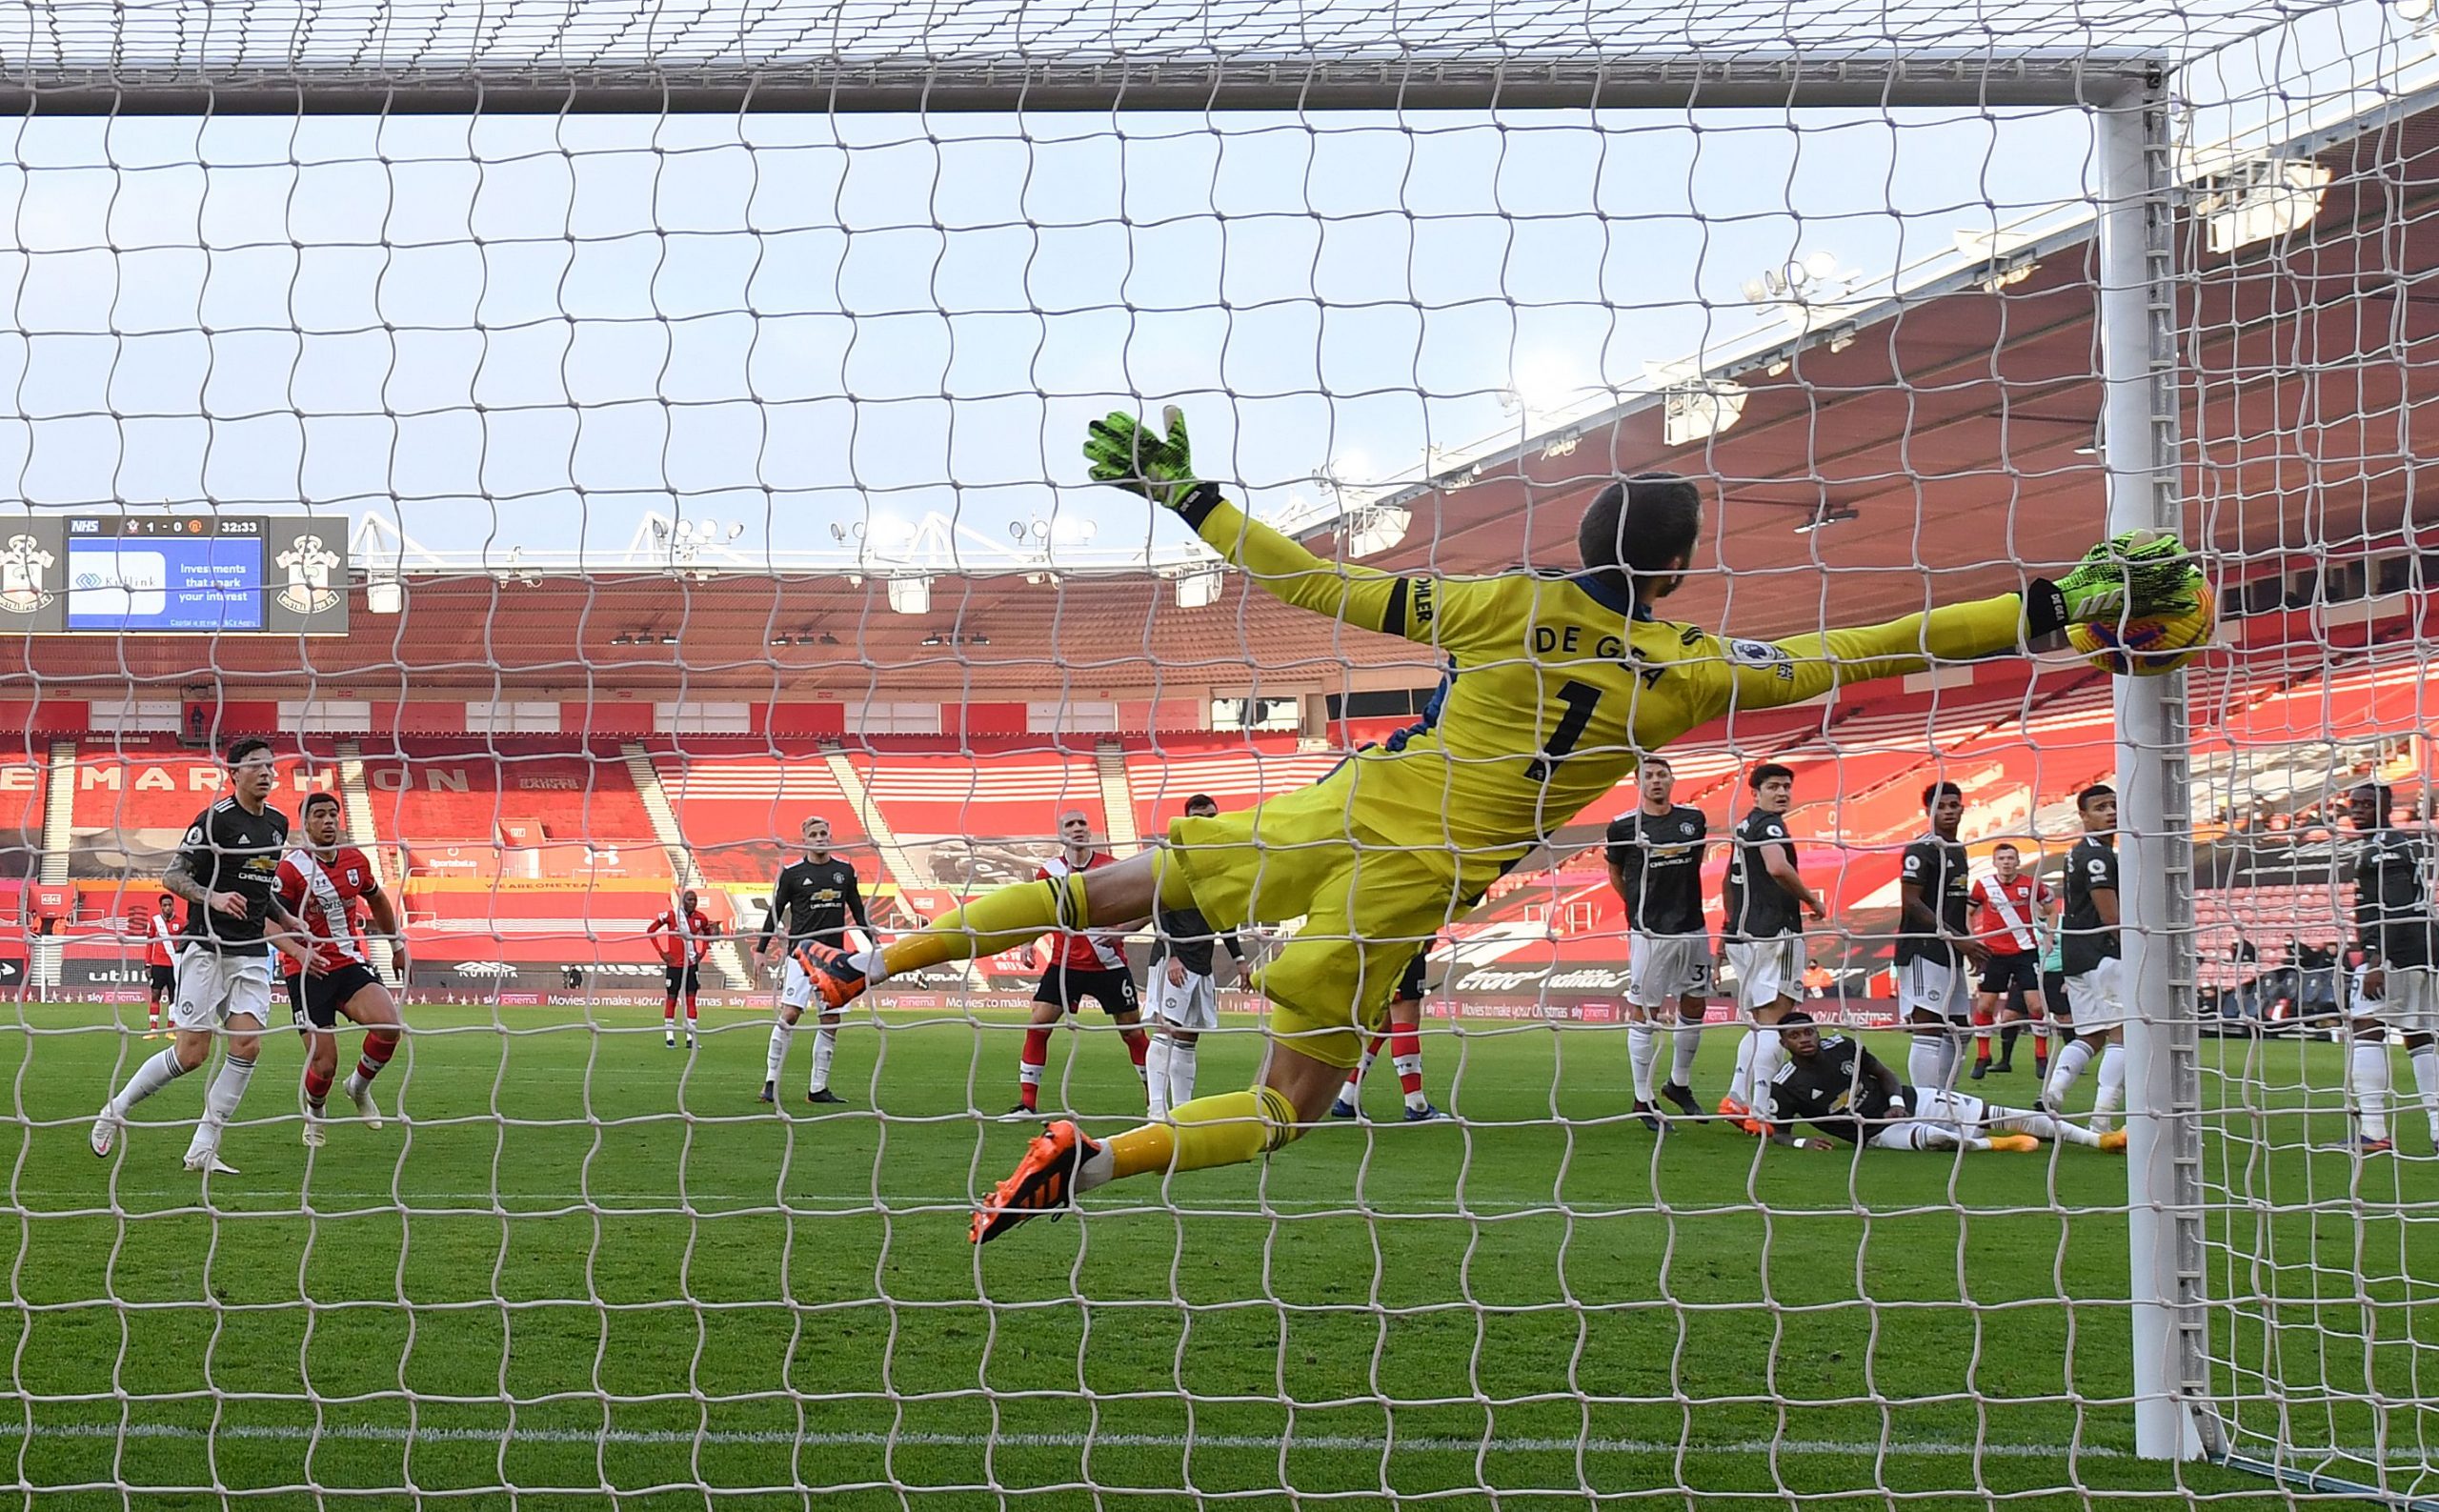 David de Gea attempts to save a shot against Southampton. (Photo by MIKE HEWITT/POOL/AFP via Getty Images)